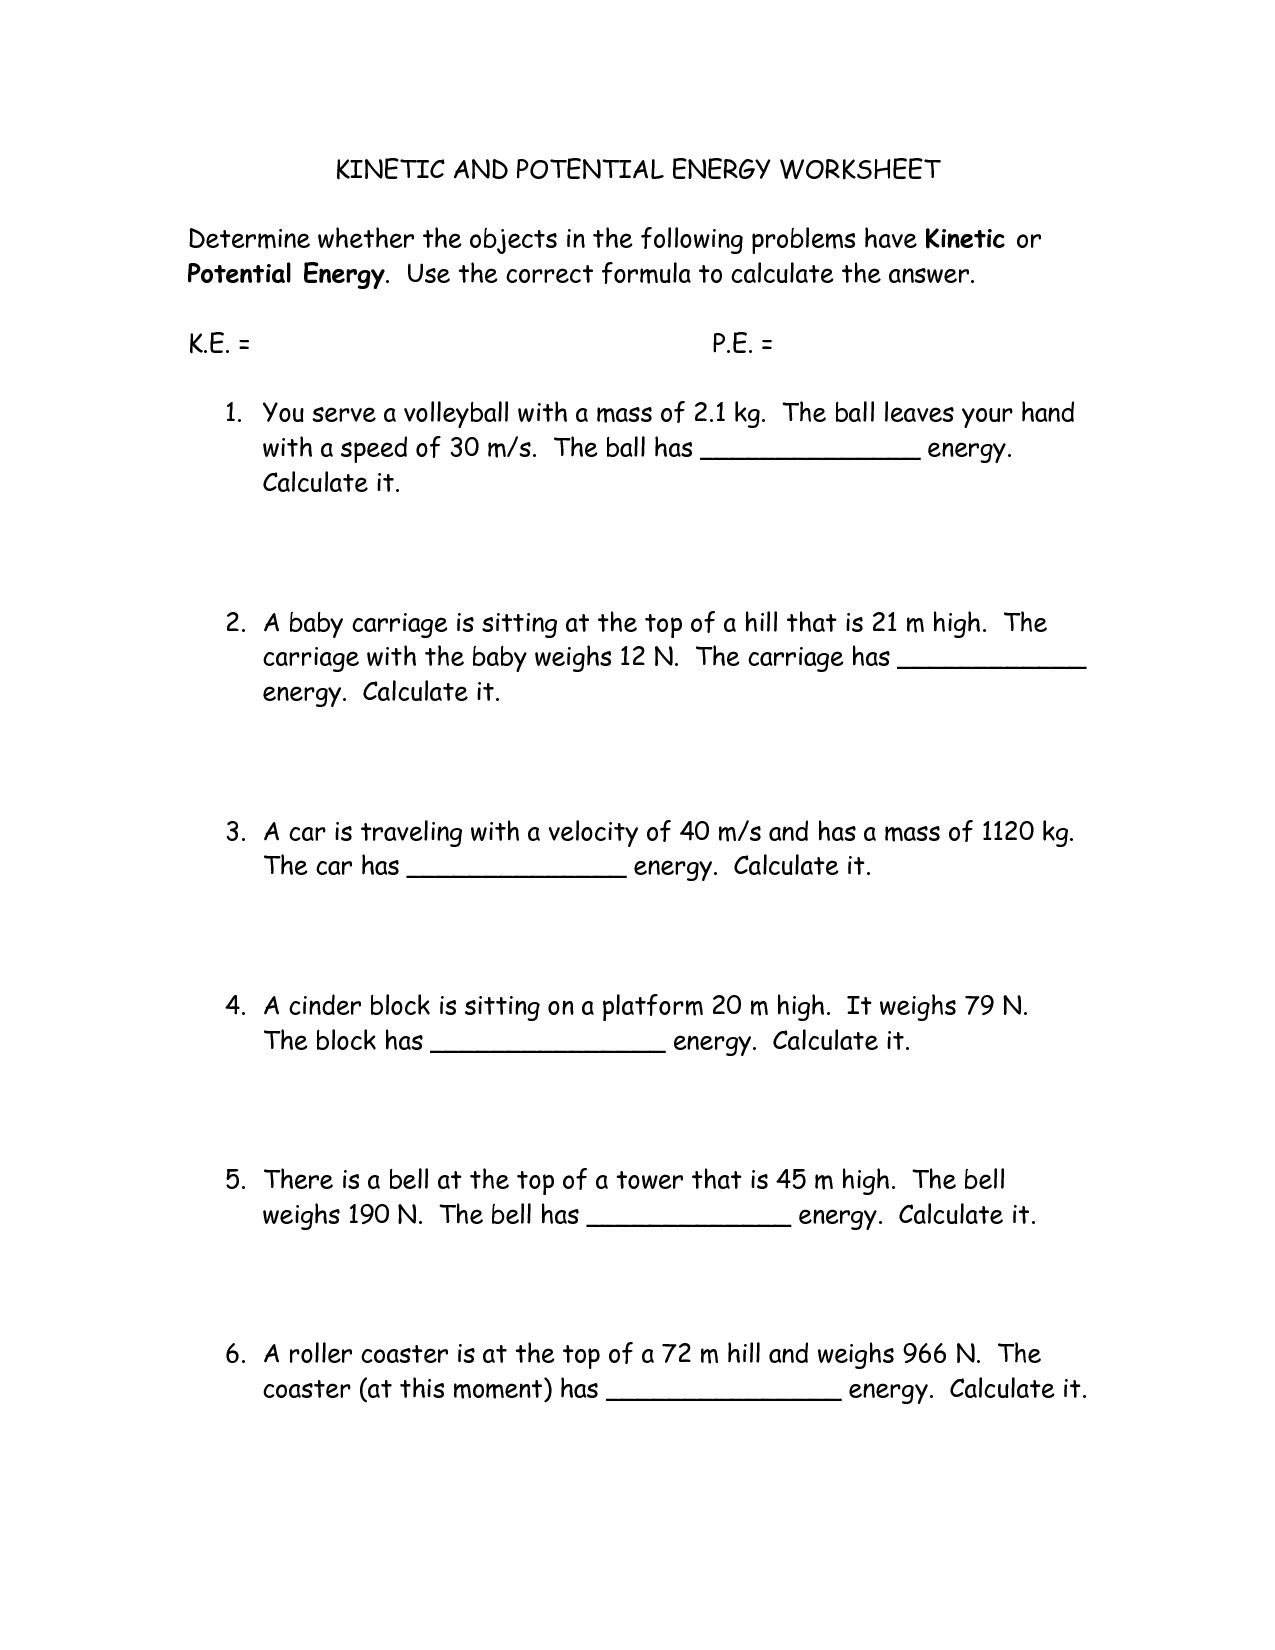 Potential and Kinetic Energy Worksheet with Answers